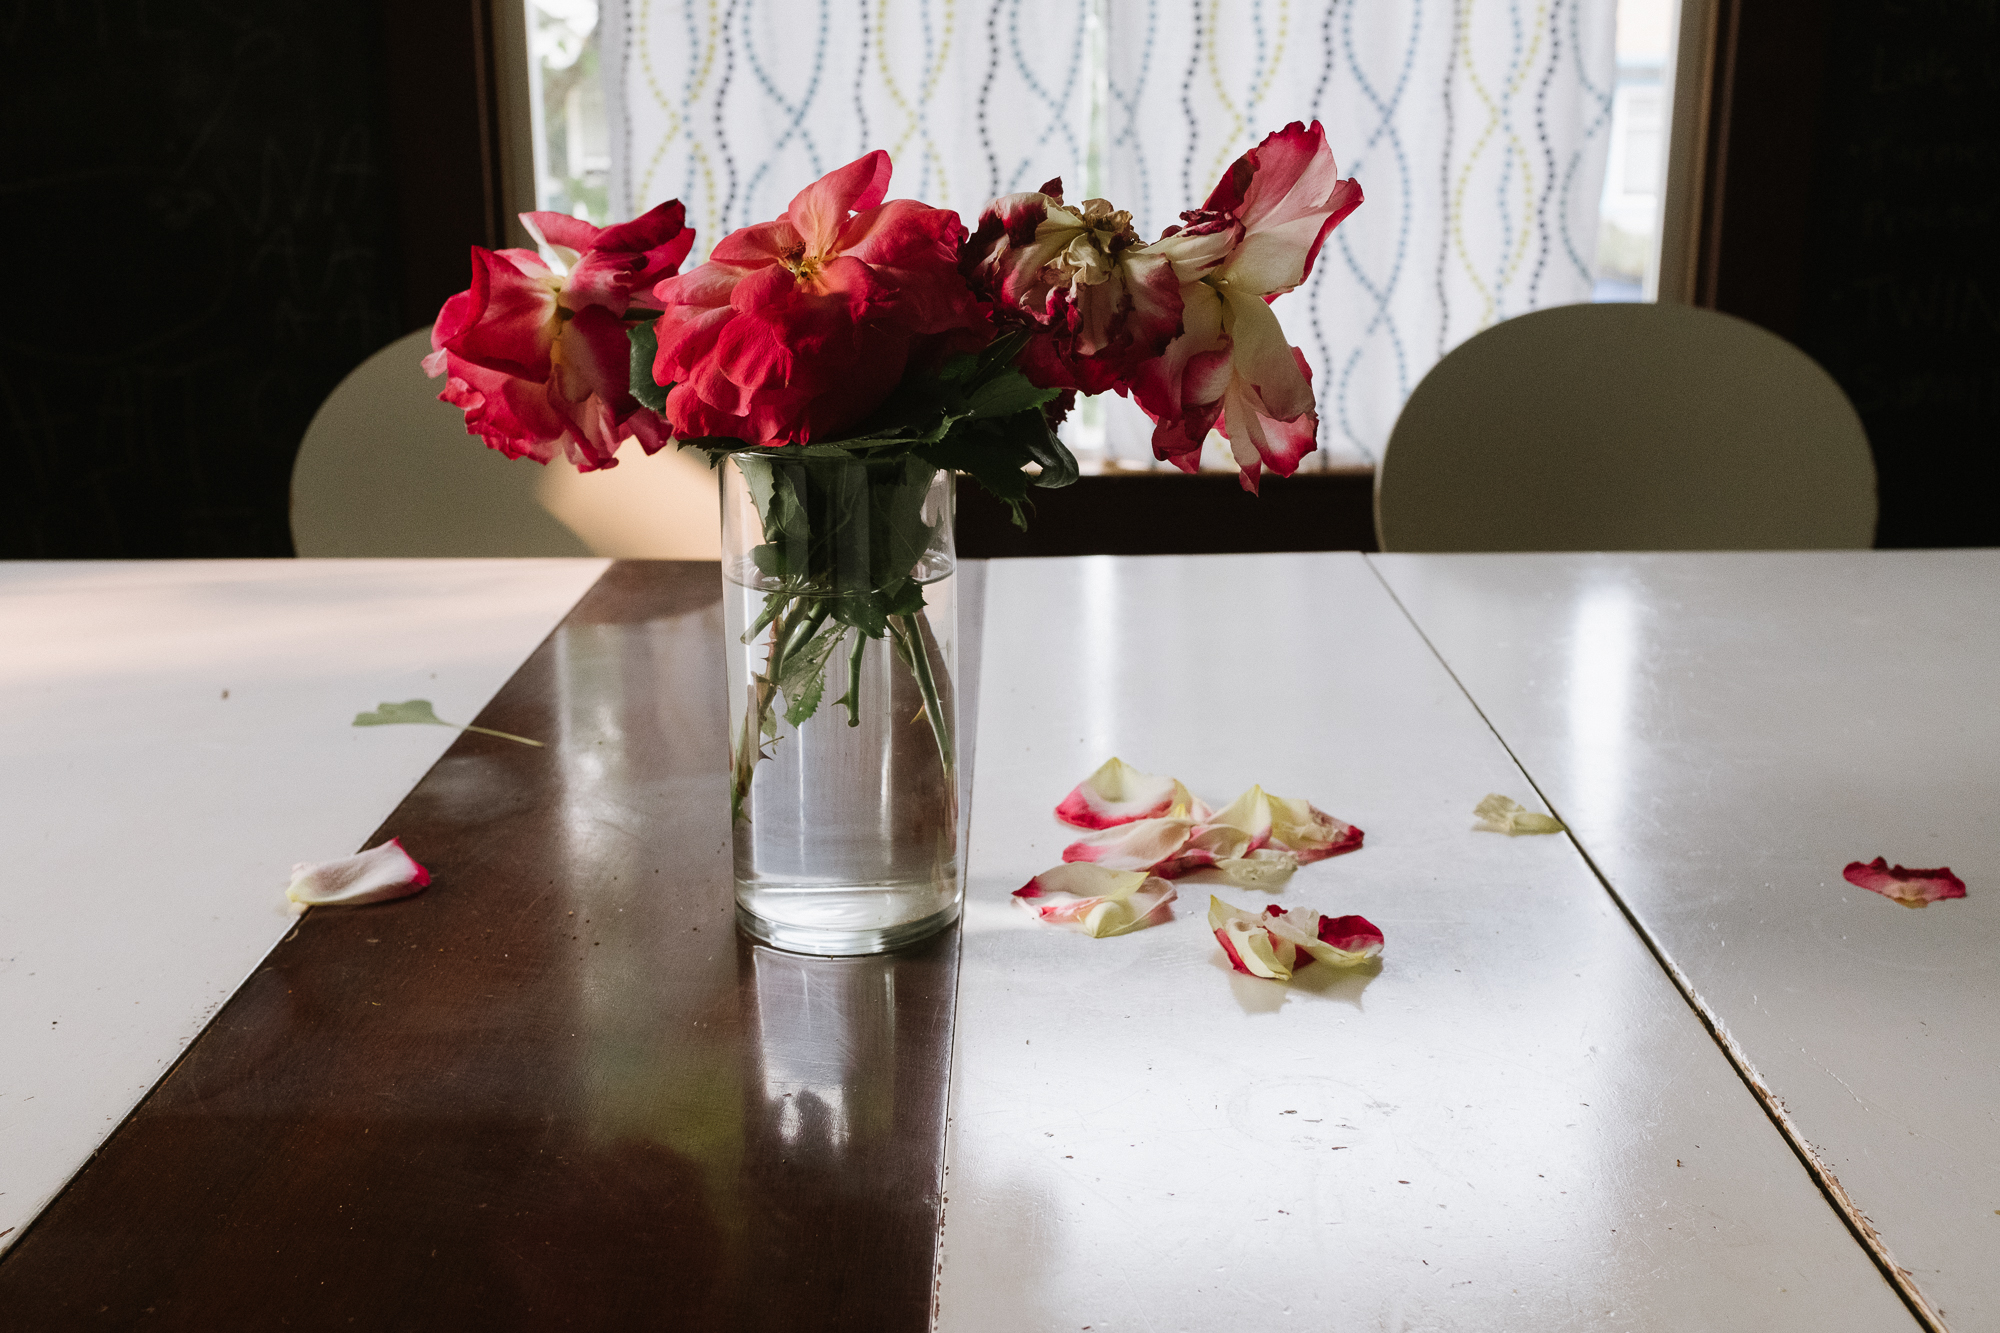 Flowers dropping petals on table - documentary family photography